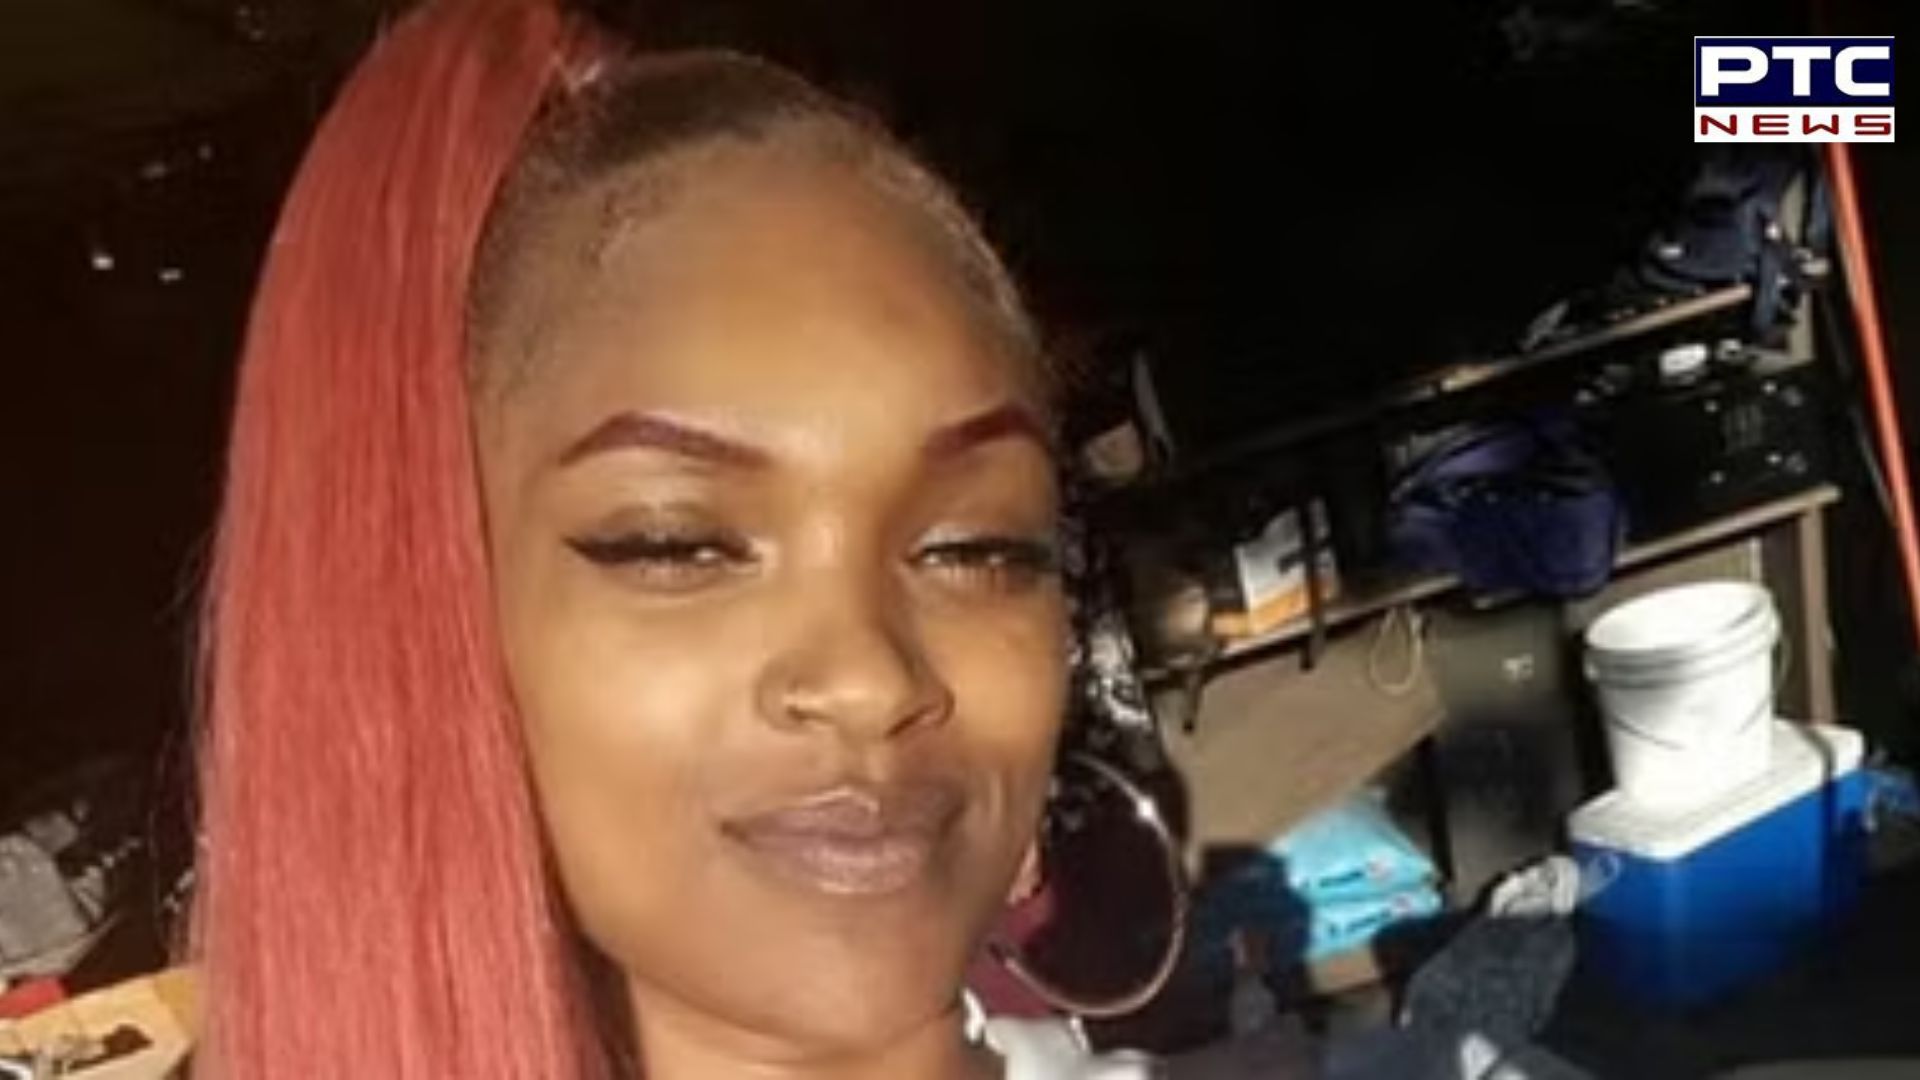 Woman dials 911 to report domestic violence, shot dead by police